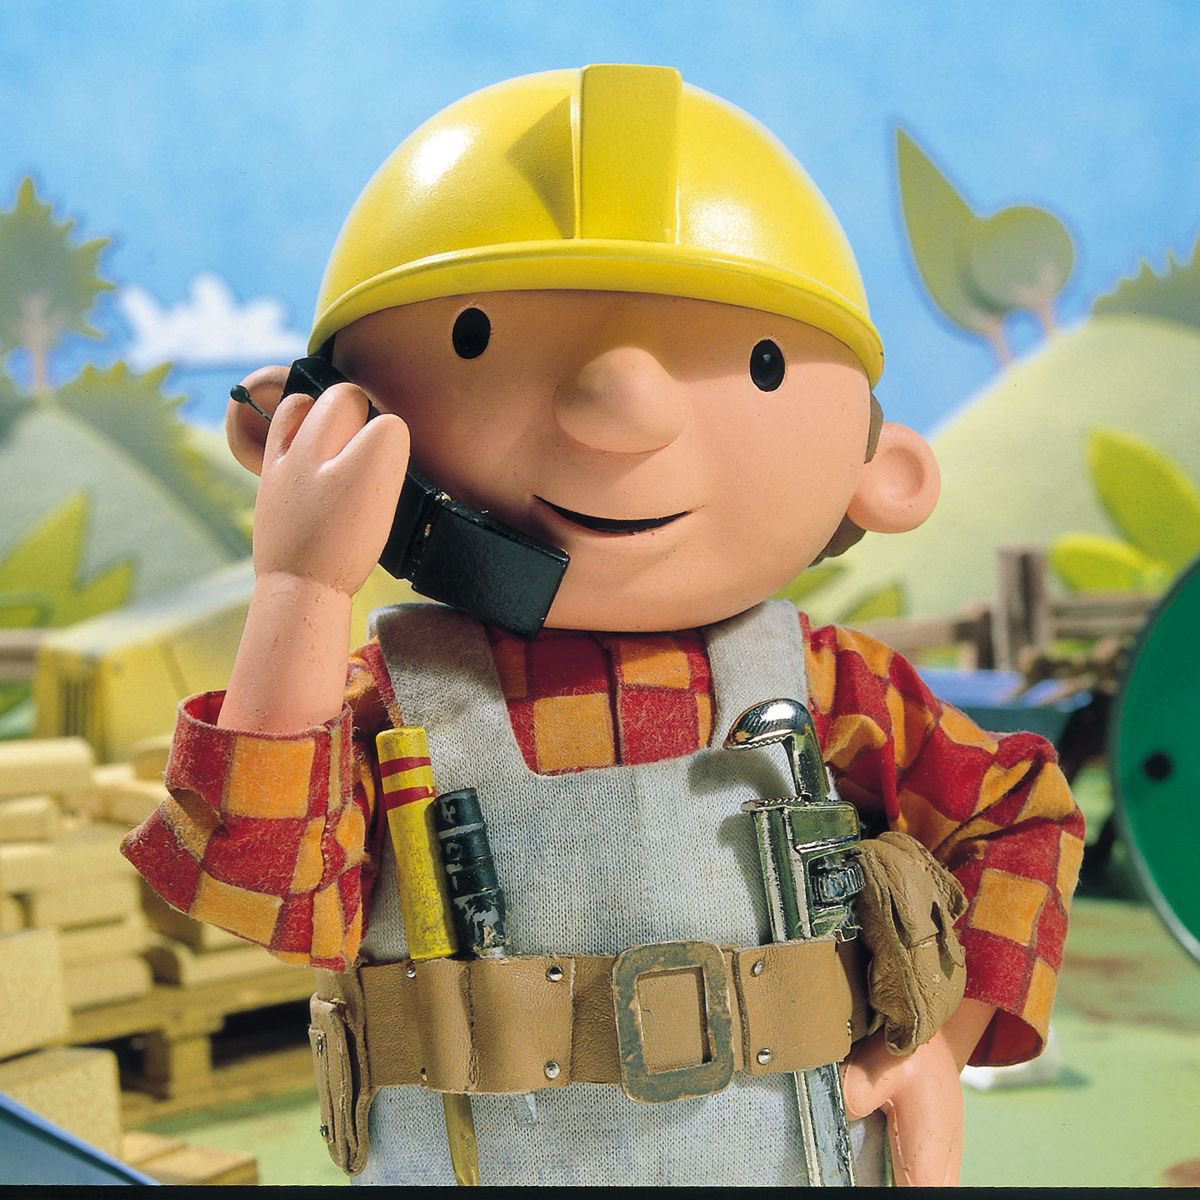 She said she need a big ol' booty, called up bob the builder. 